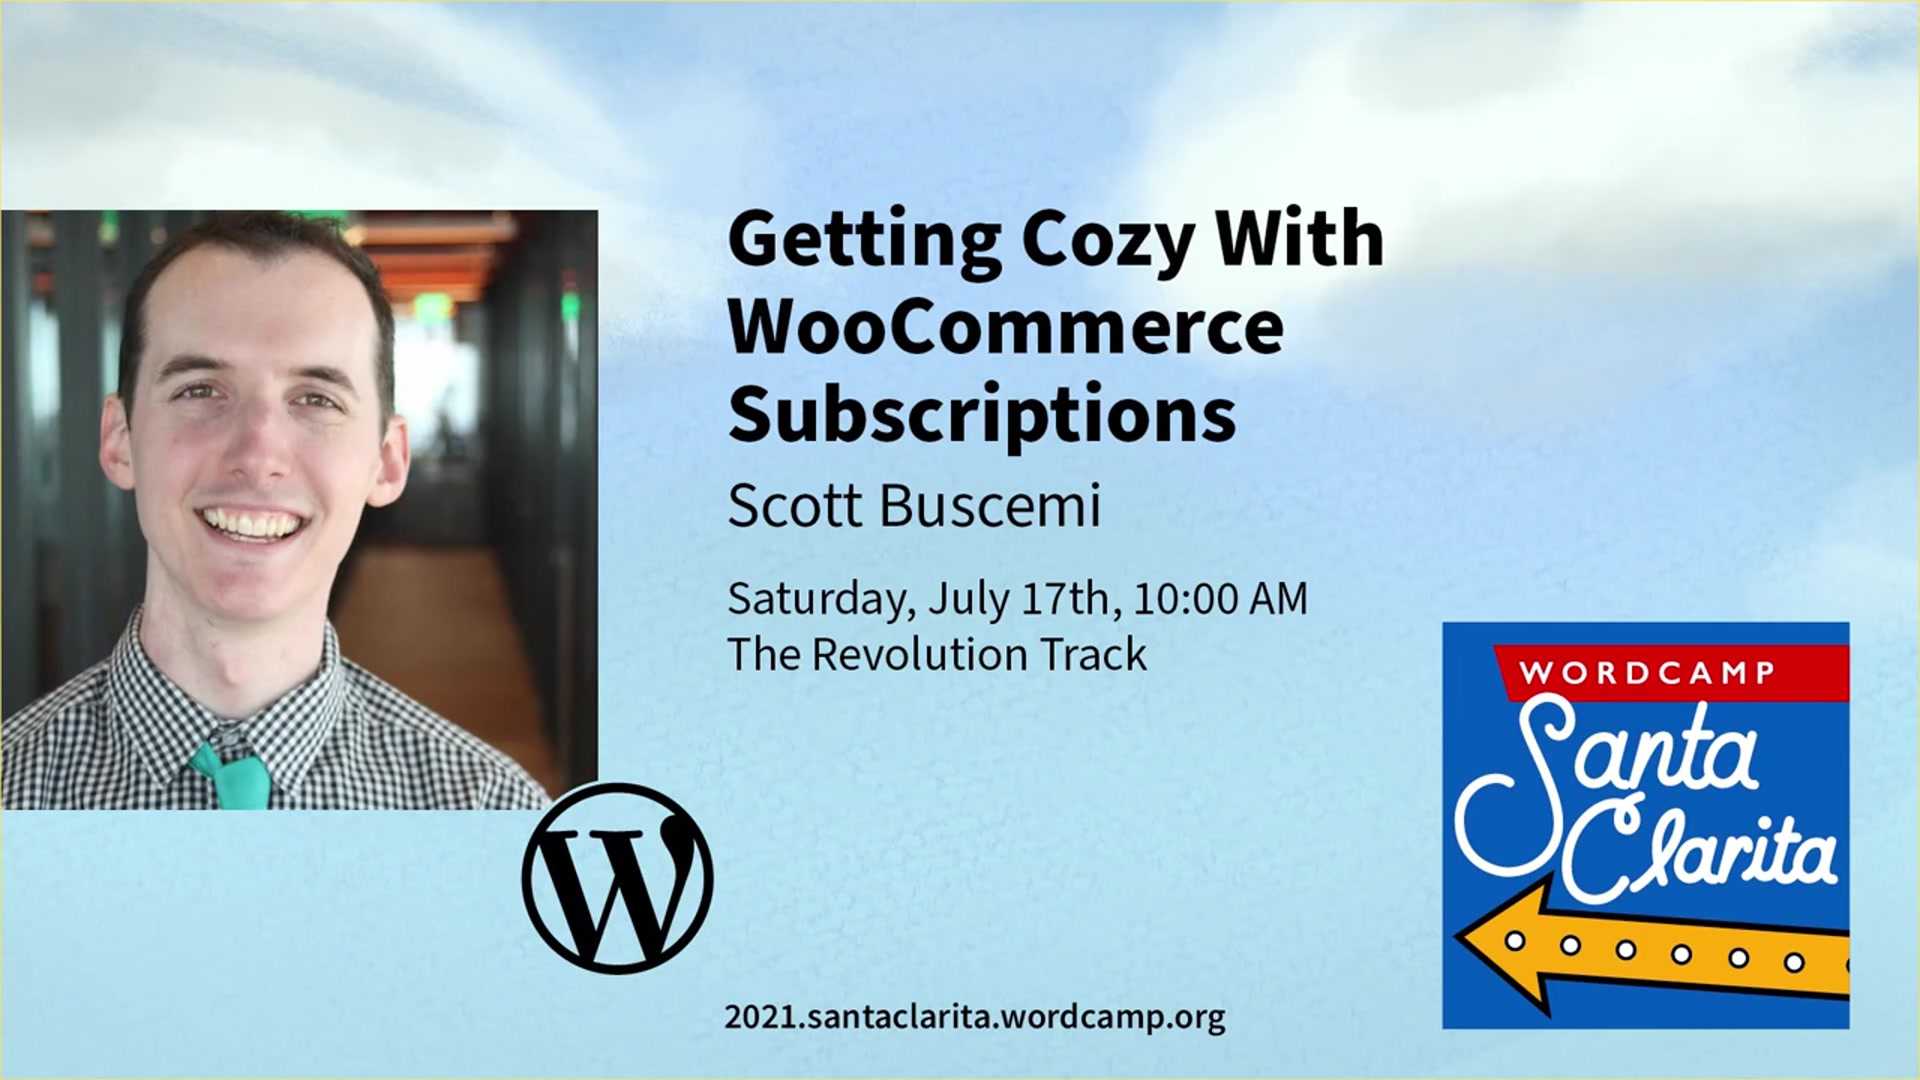 Scott Buscemi: Getting Cozy with WooCommerce Subscriptions